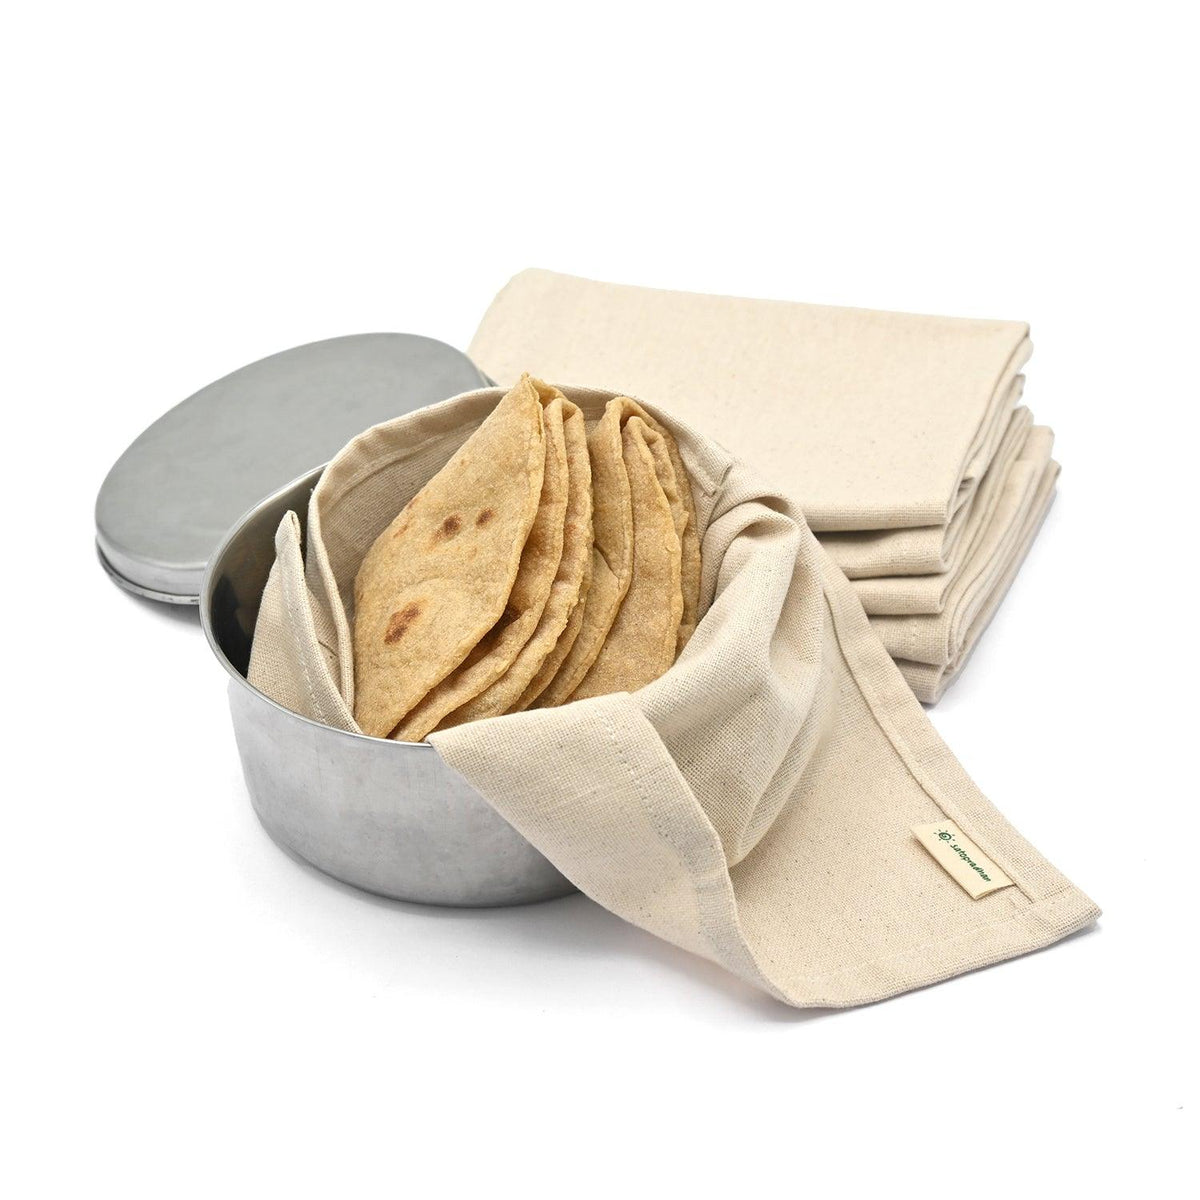 A set of 6 chapati covers used for wrapping roti and other food products, made from organic cotton fabric